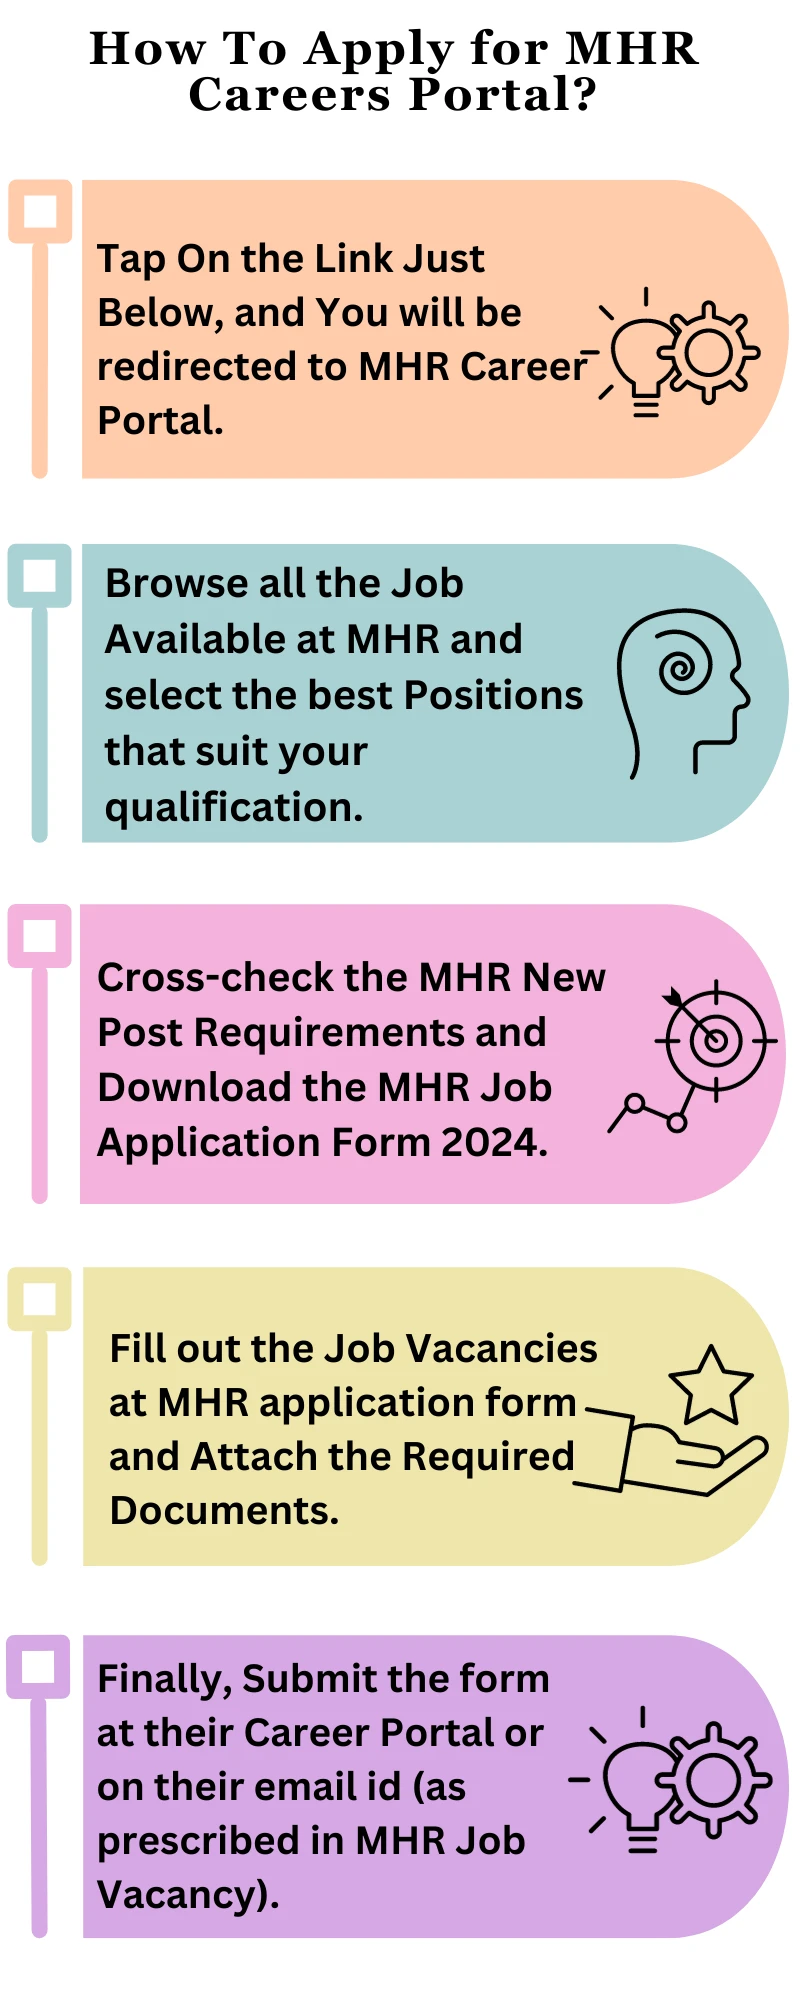 How To Apply for MHR Careers Portal?